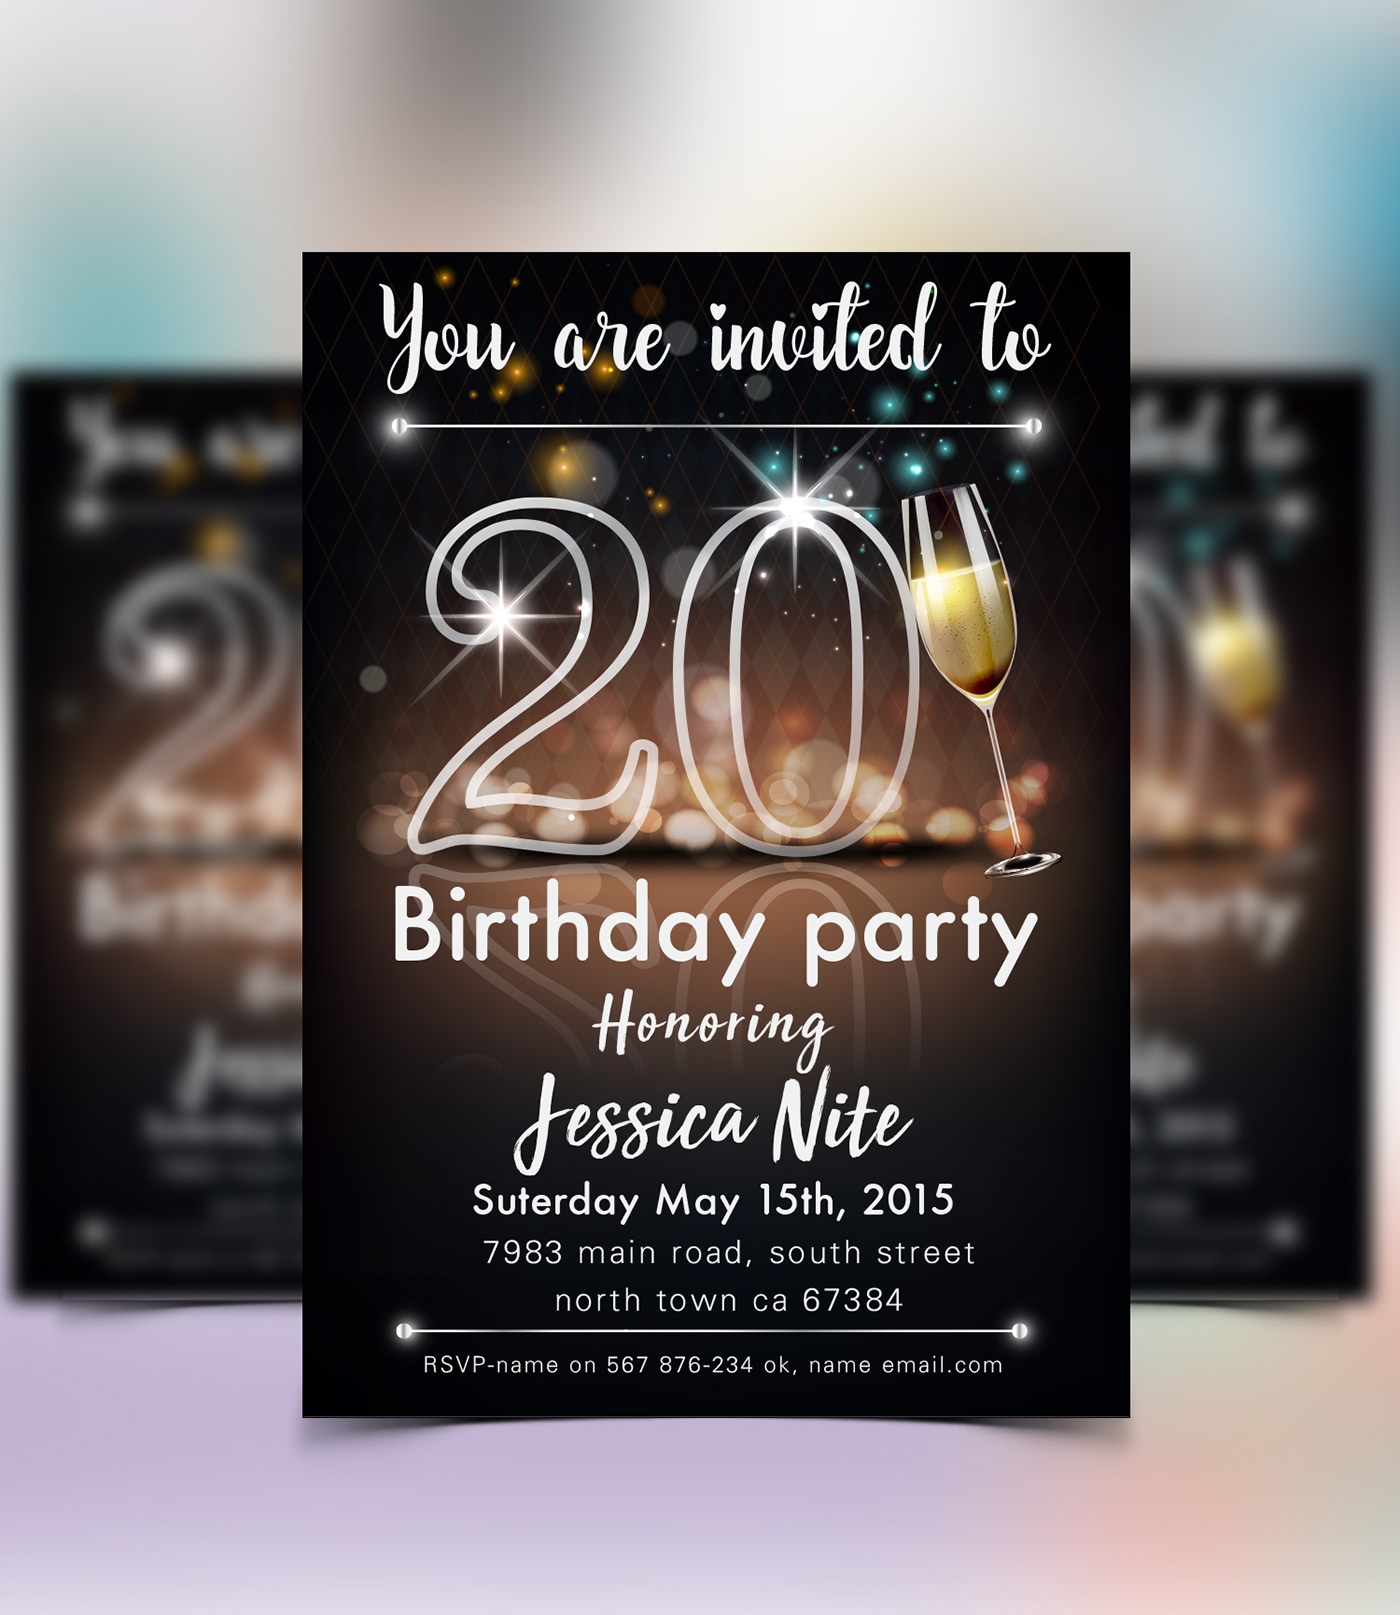 Save The Date, Birthday Invitation Template on Behance